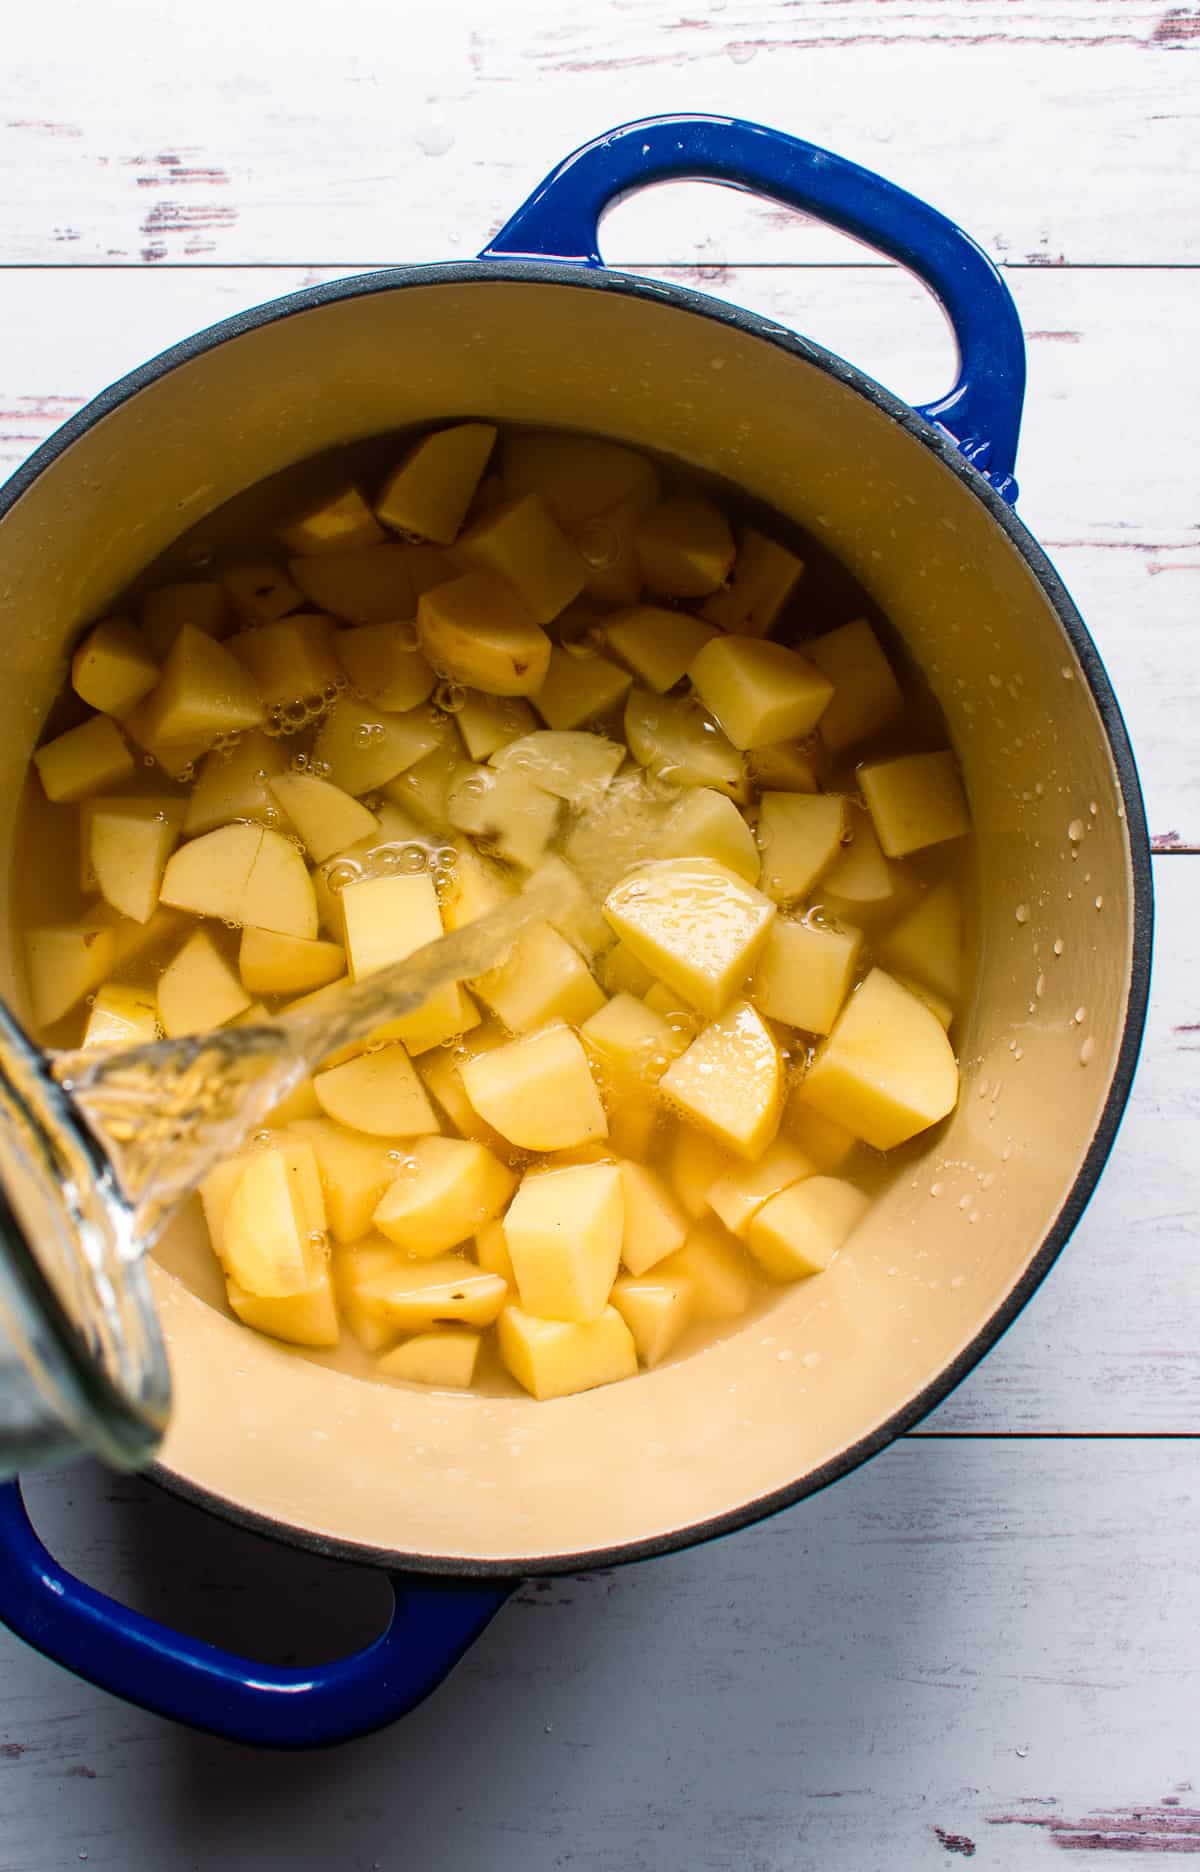 Diced potatoes in pot of water.